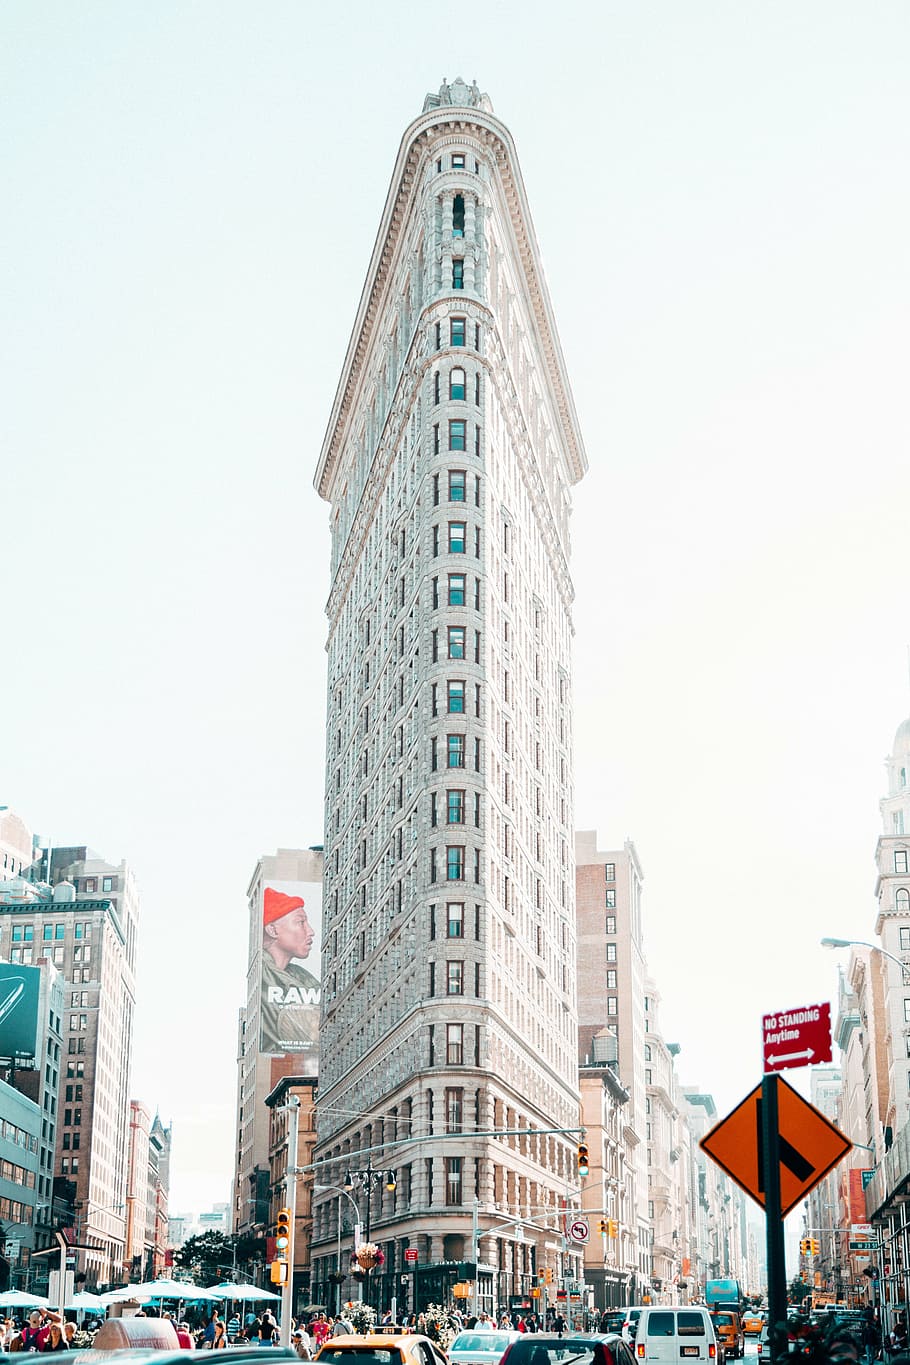 New York Flat Iron building, city, structure, architecture, people